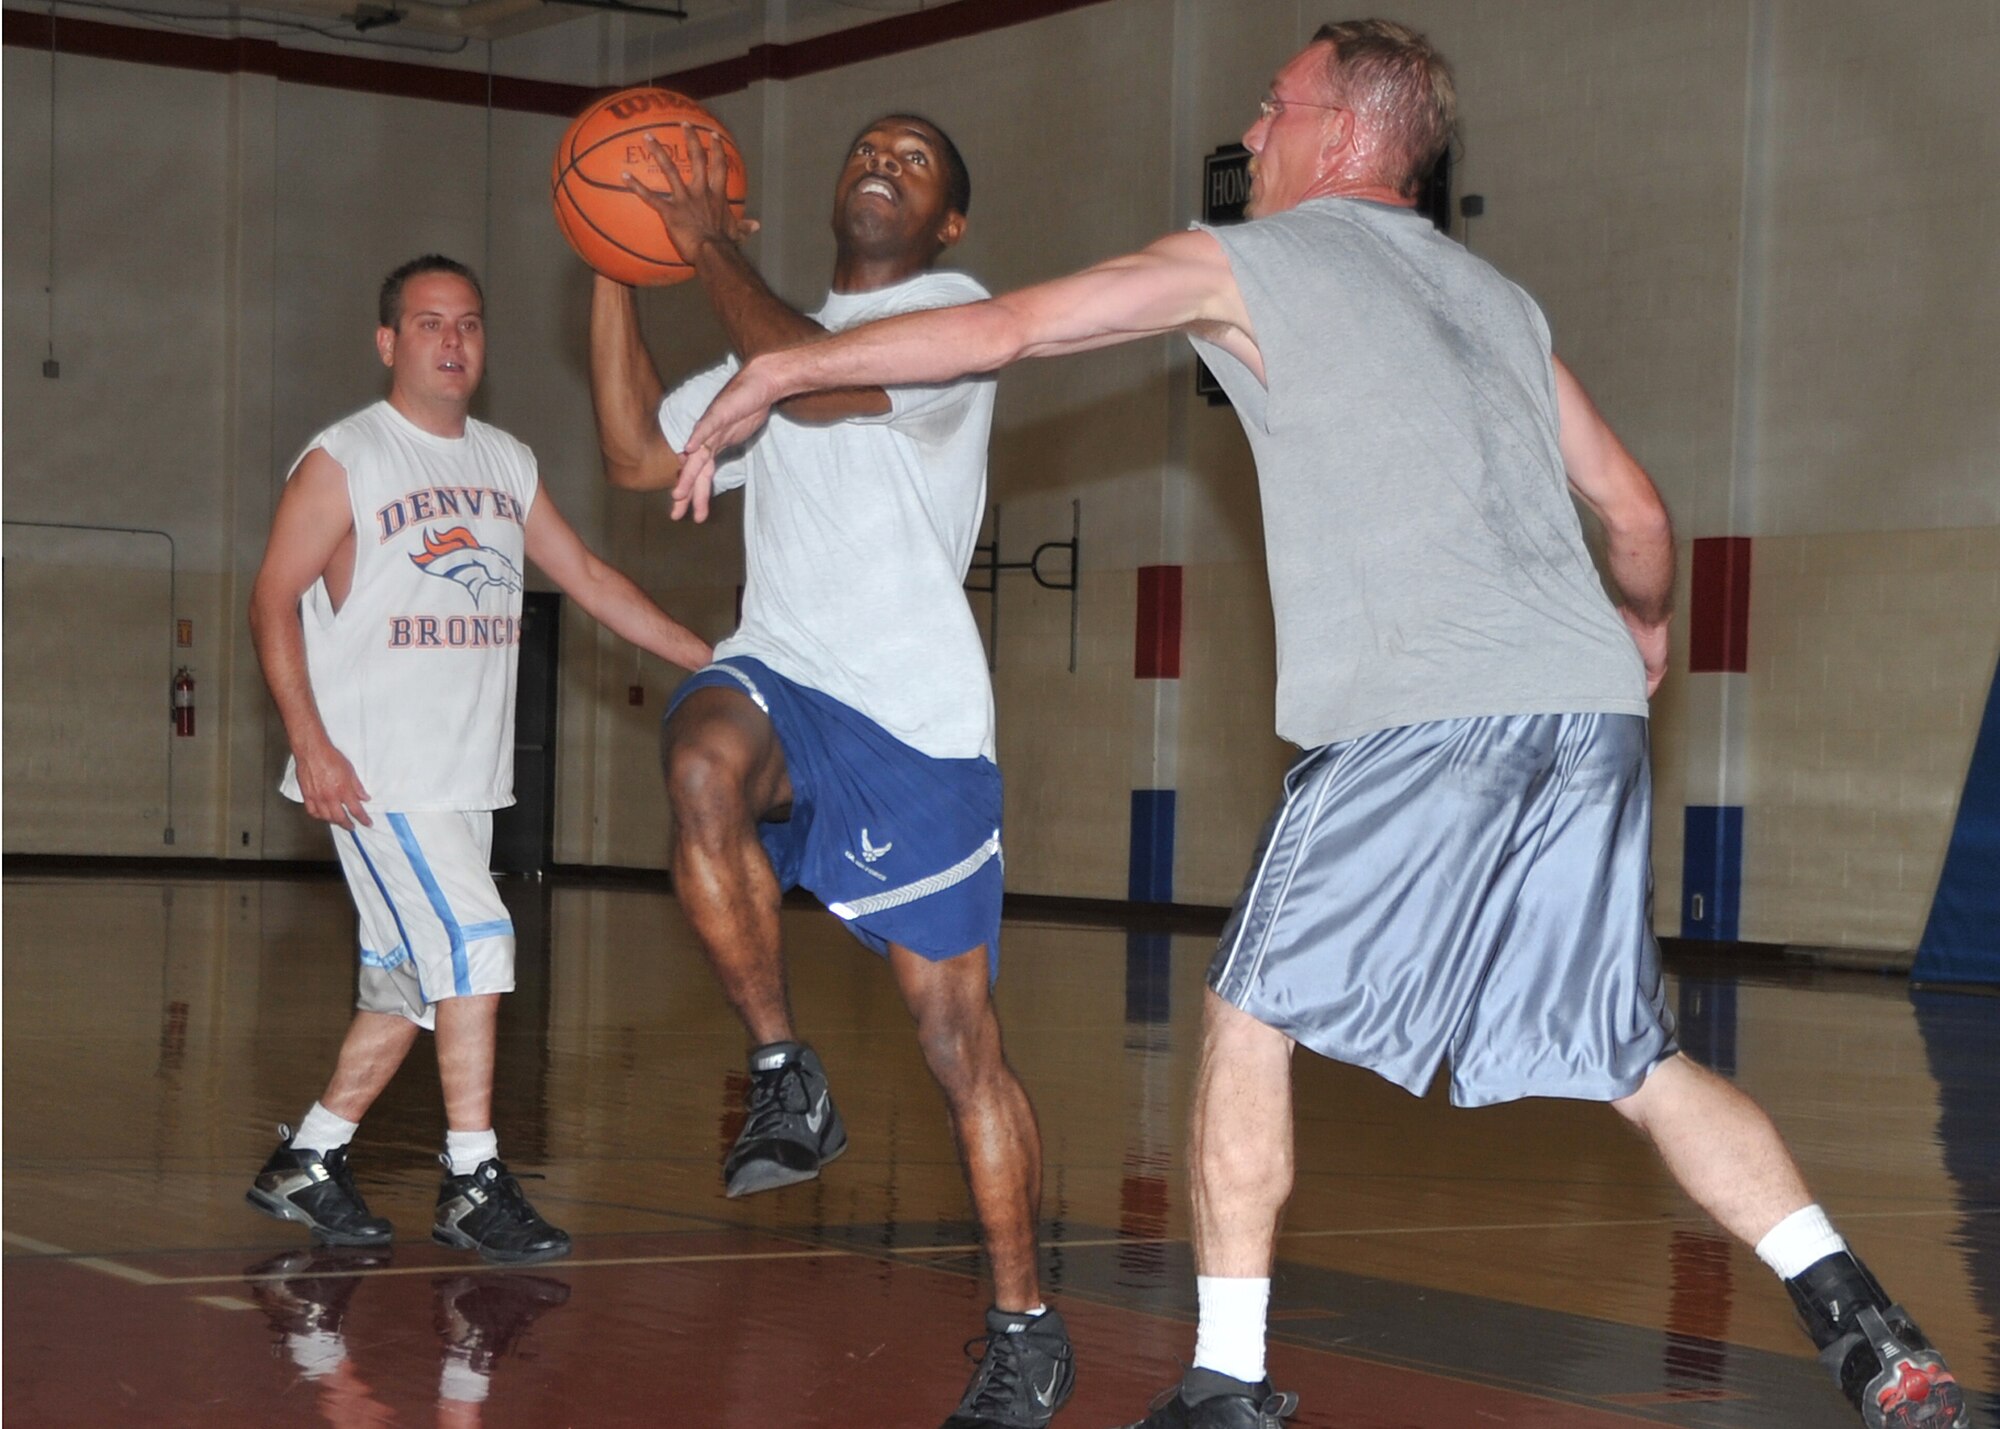 Staff Sgt. Daniel Treadway, 377th Security Forces Squadron, lays up a shot in the 3 on 3 basketball tournament Oct. 13 as part of Wing Sports Day events at the East Fitness Center.  U.S. Air Force Photo by Todd Berenger